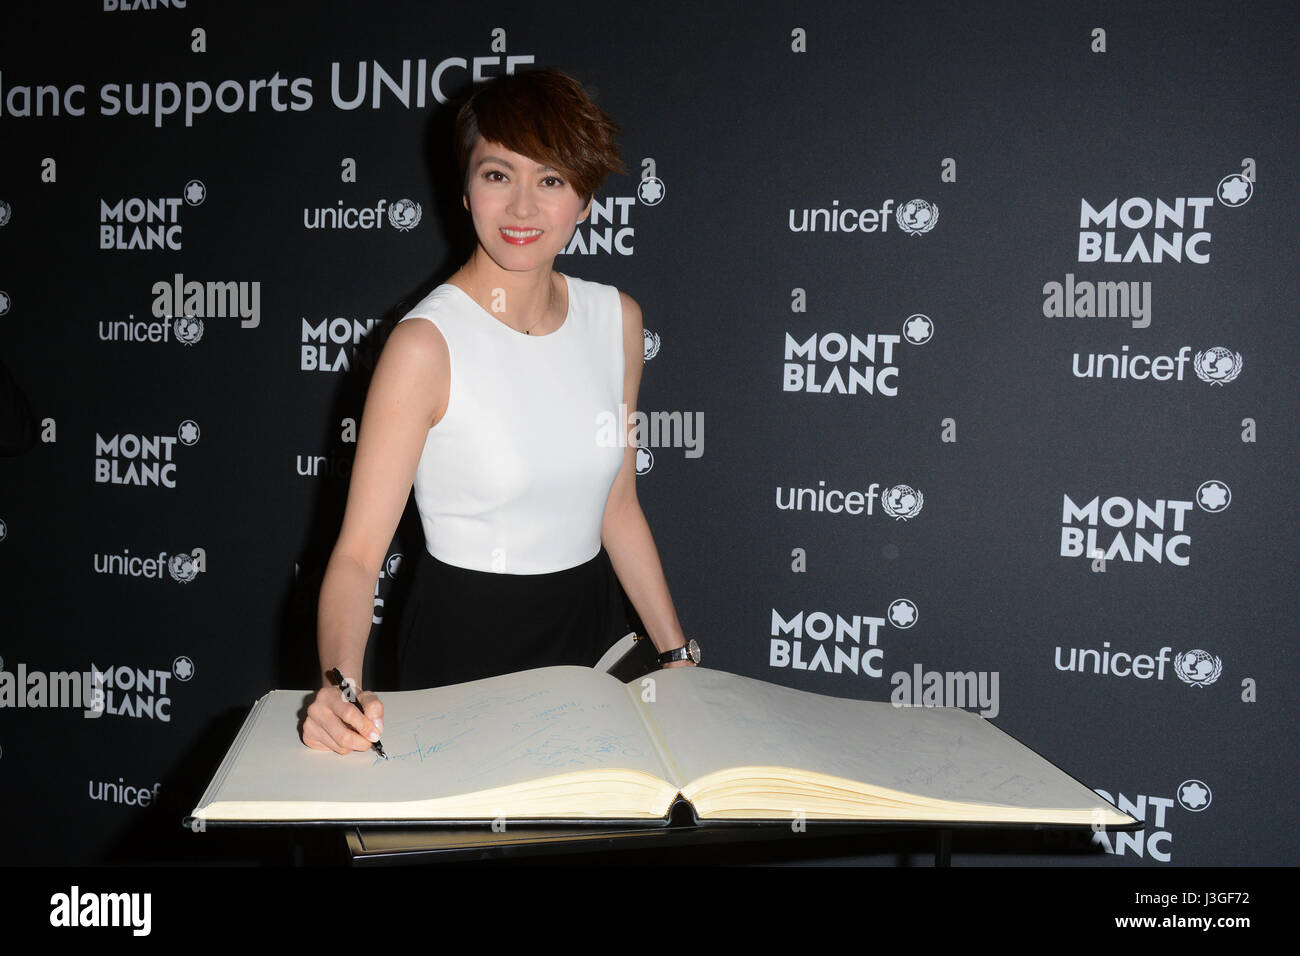 Montblanc for UNICEF collection launch and gala dinner at the New York Public Library - Arrivals Featuring: Gigi Leung Where: New York, United States When: 03 Apr 2017 Stock Photo